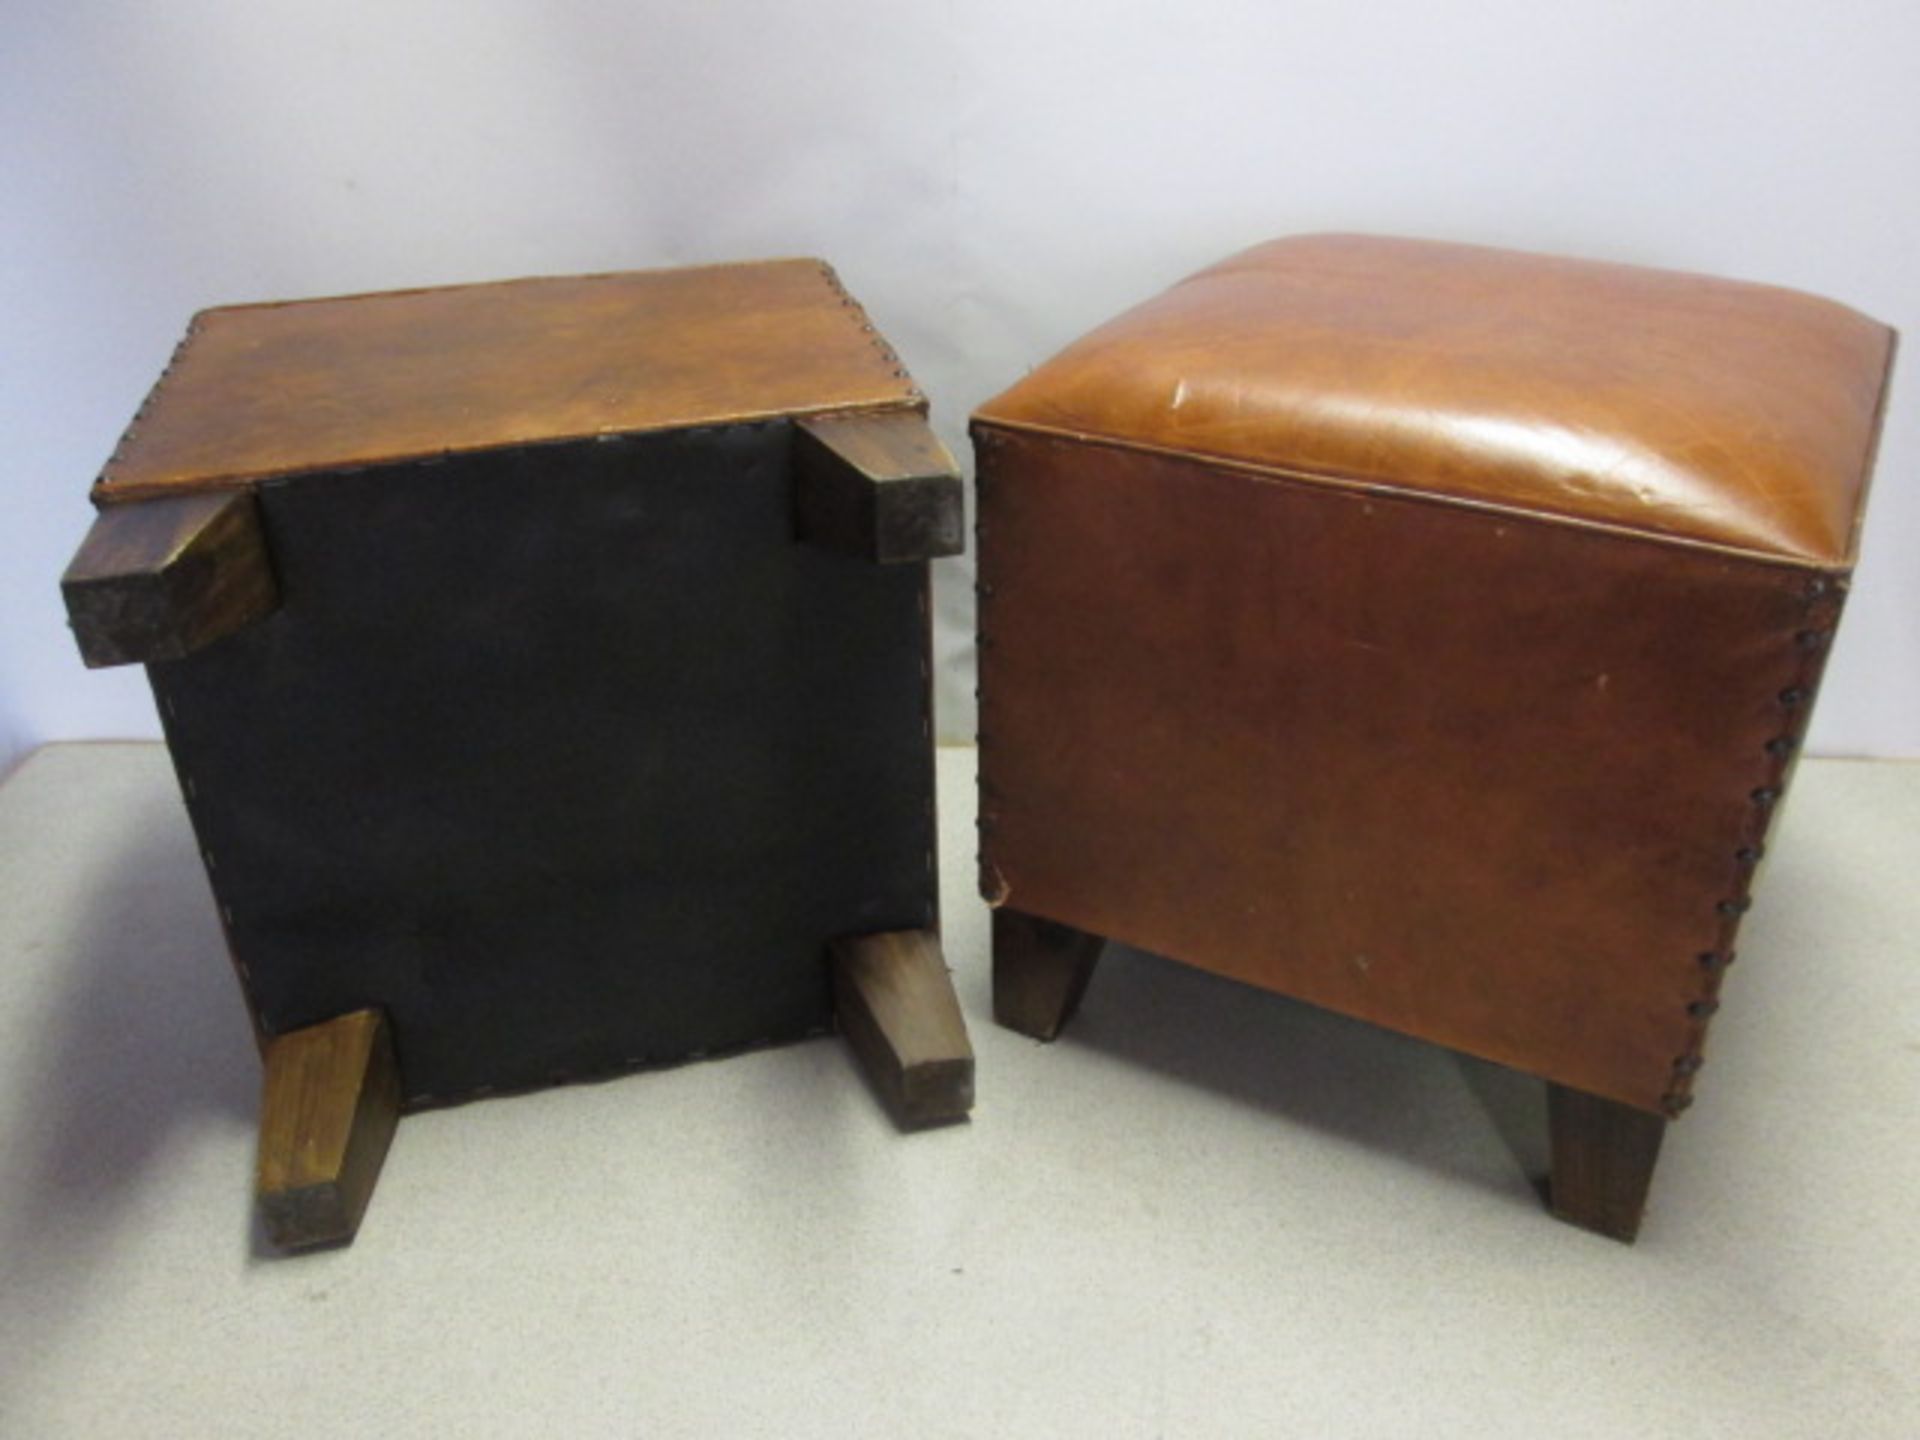 4 x Maisons Du Monde Brown Leather Stools with Padded Seat and Stud Nail Detail To Sides. RRP 119.90 - Image 6 of 6